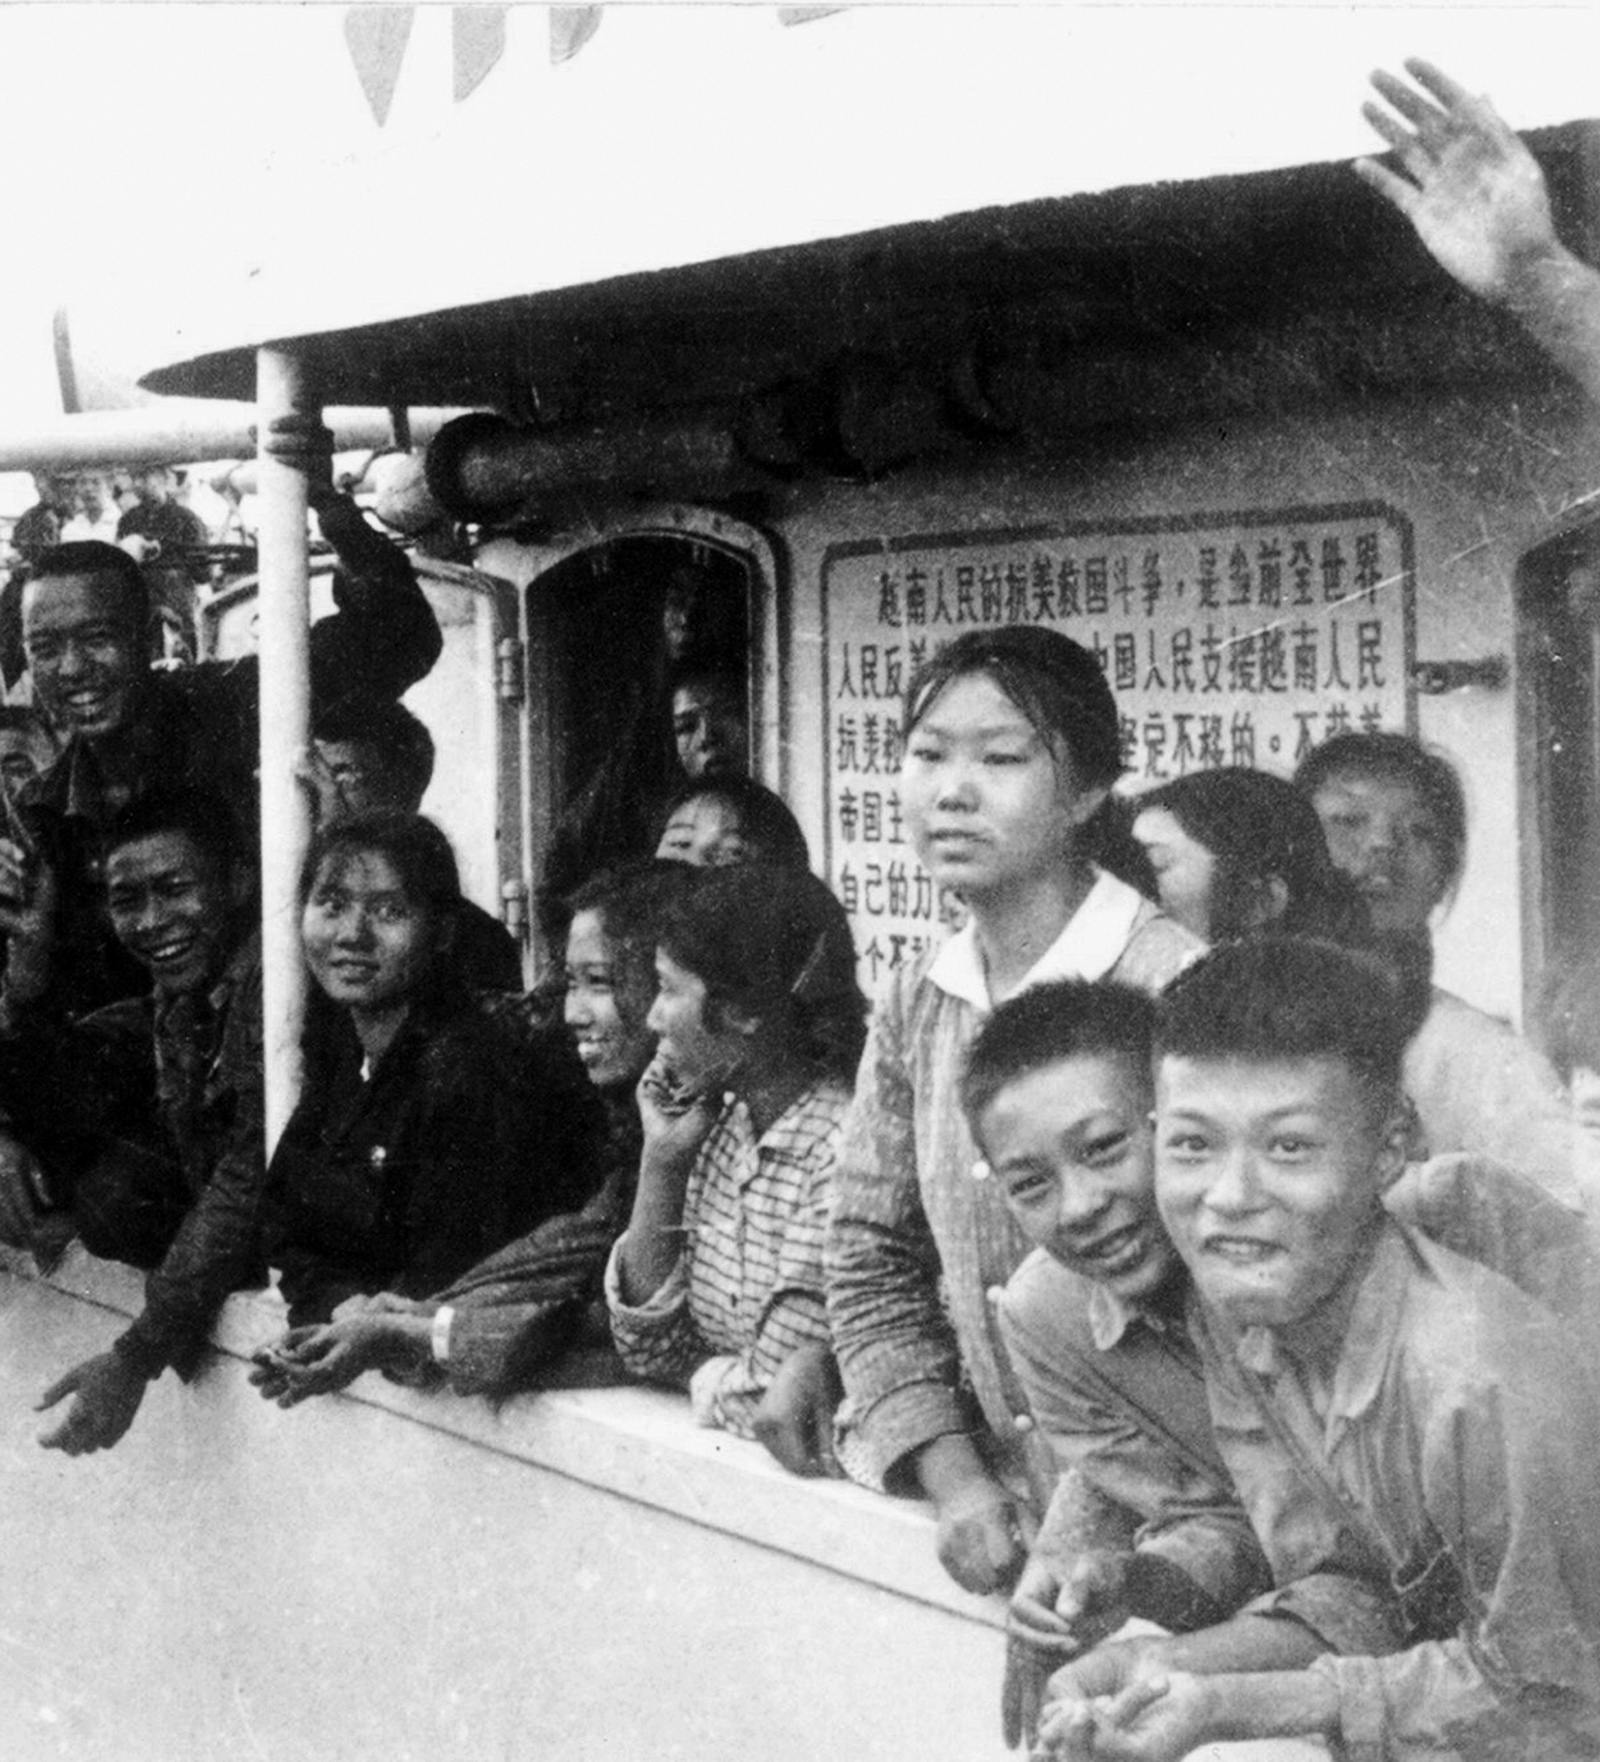 Chinese middle school graduates (zhiqing), 15 million of whom were ‘sent down to the countryside and up to the mountains’ to ‘learn from the peasants’ during the Cultural Revolution, aboard a Red Guard ship that was about to sail from Guangzhou to Hainan Island